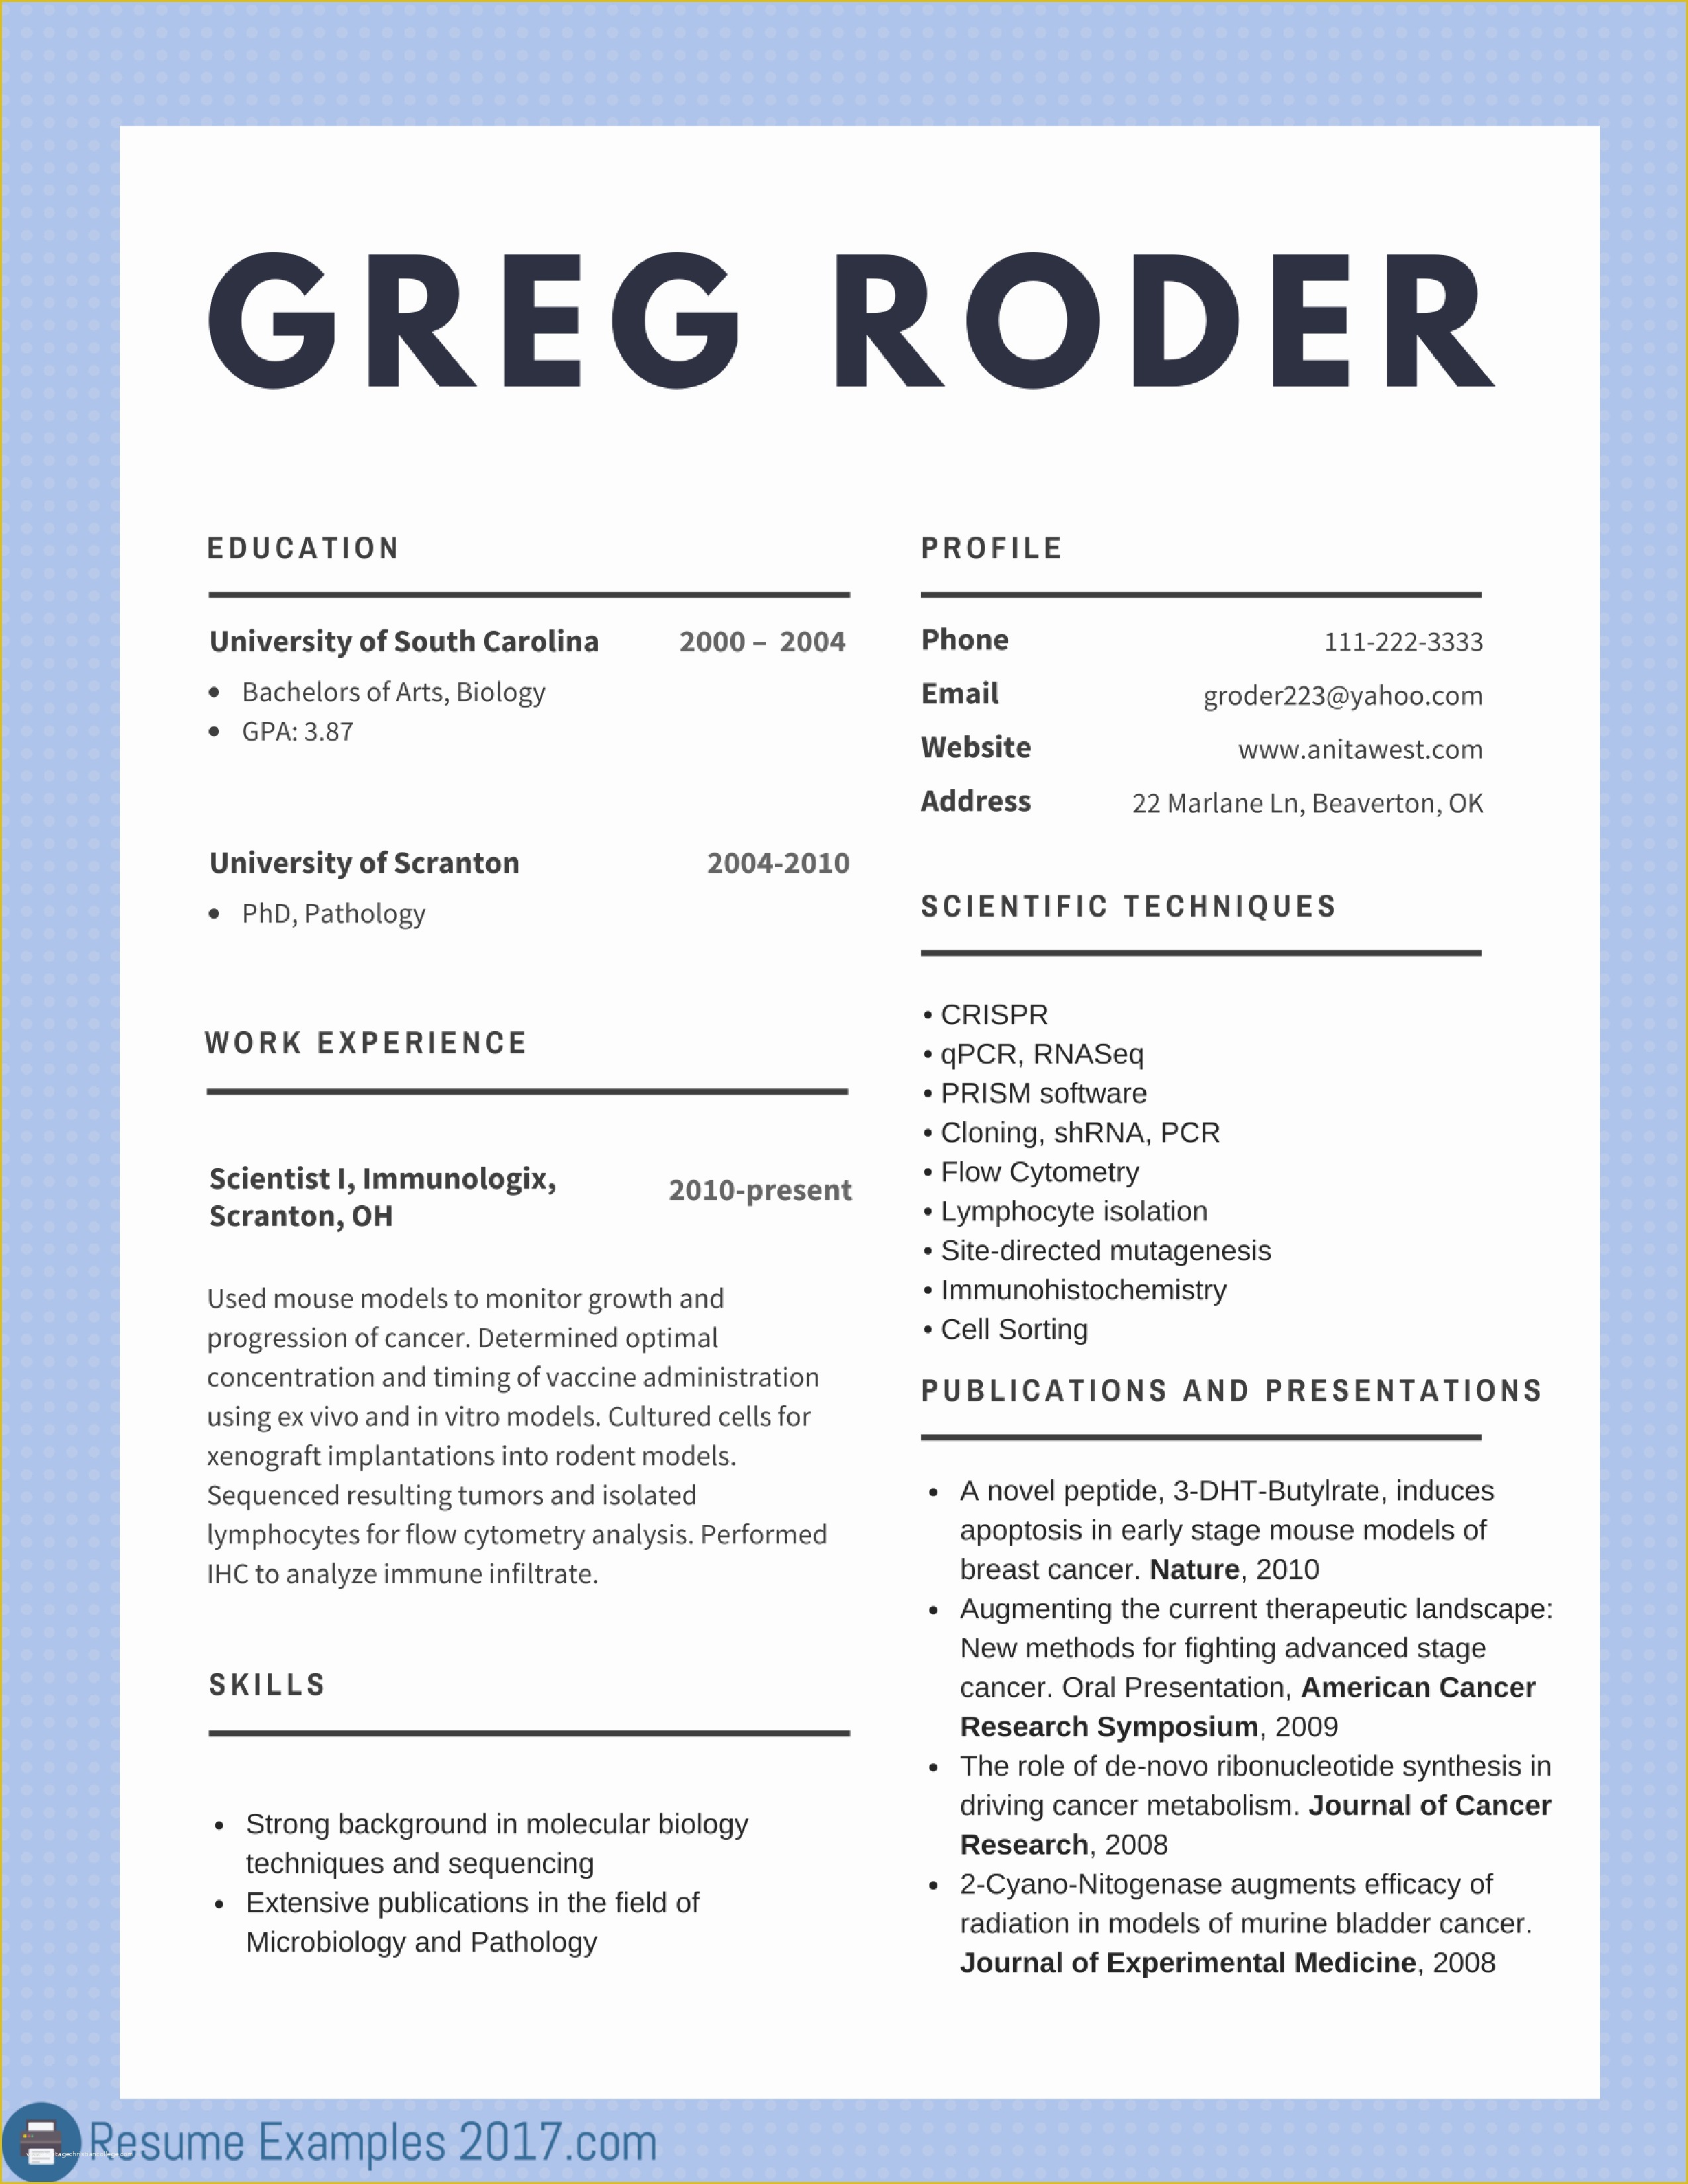 Resume Free Template 2017 Of Best Cv Examples 2018 to Try